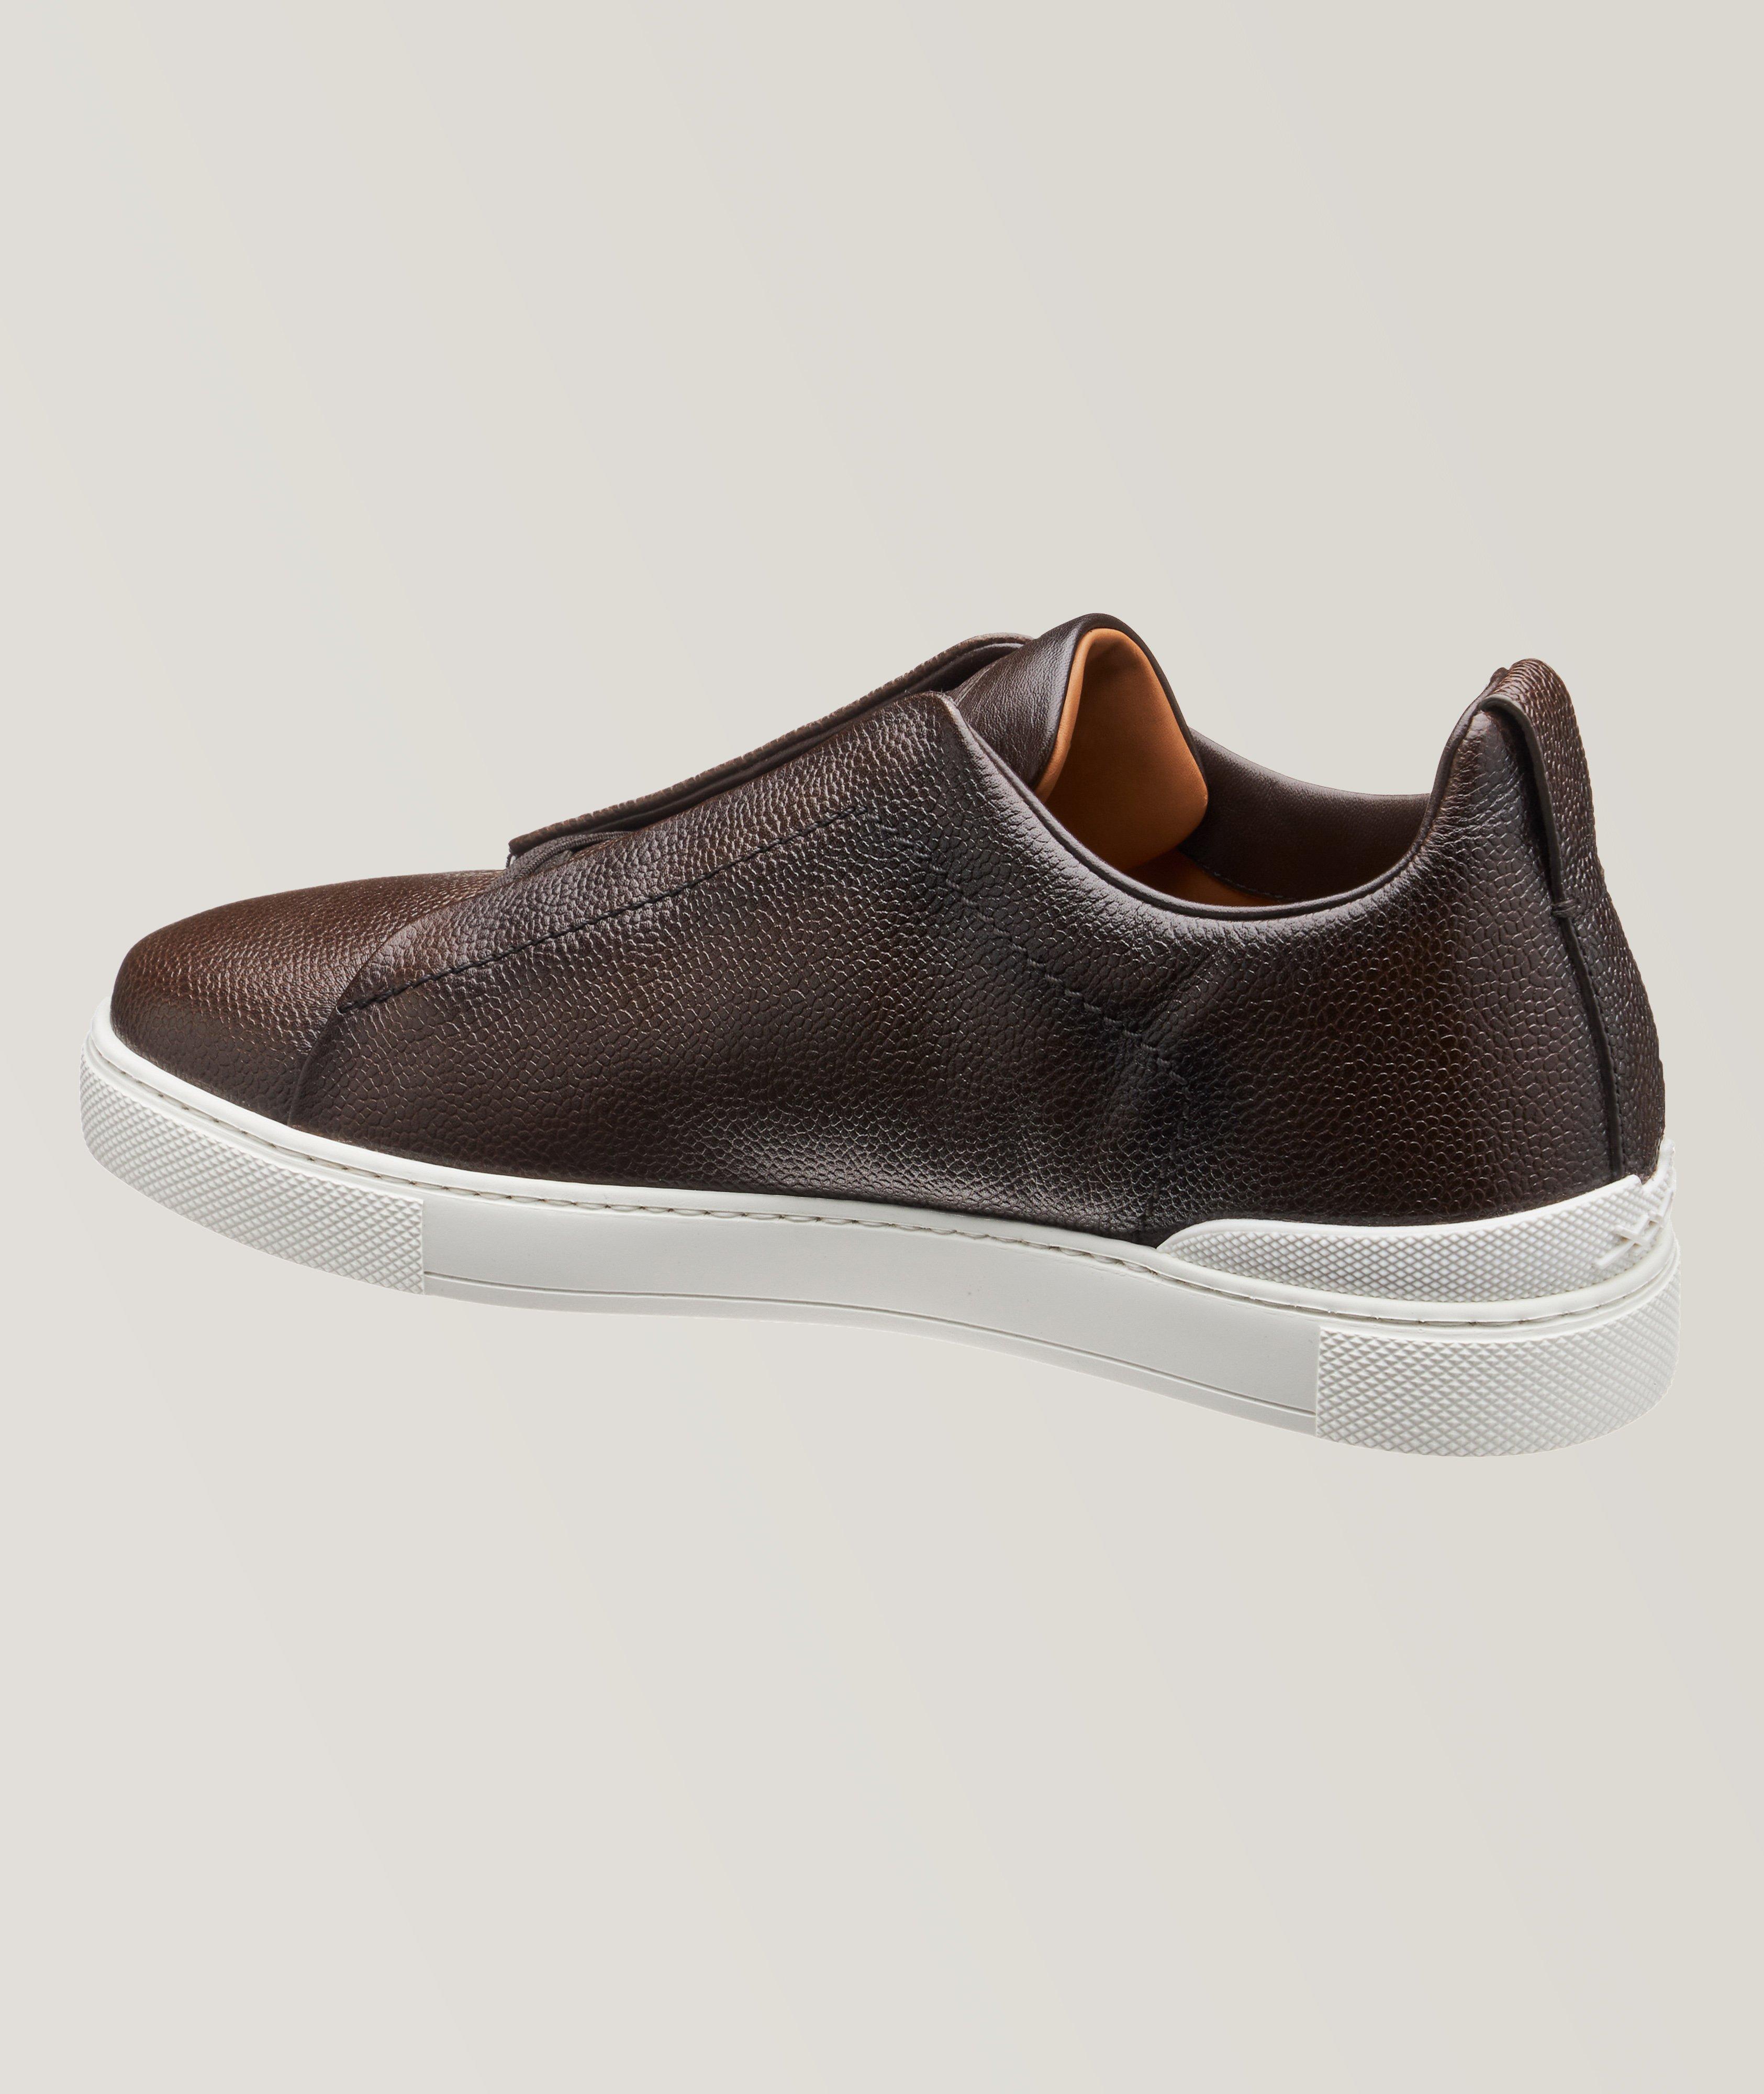 Triple Stitch Pebbled Leather Slip-On Sneakers image 1